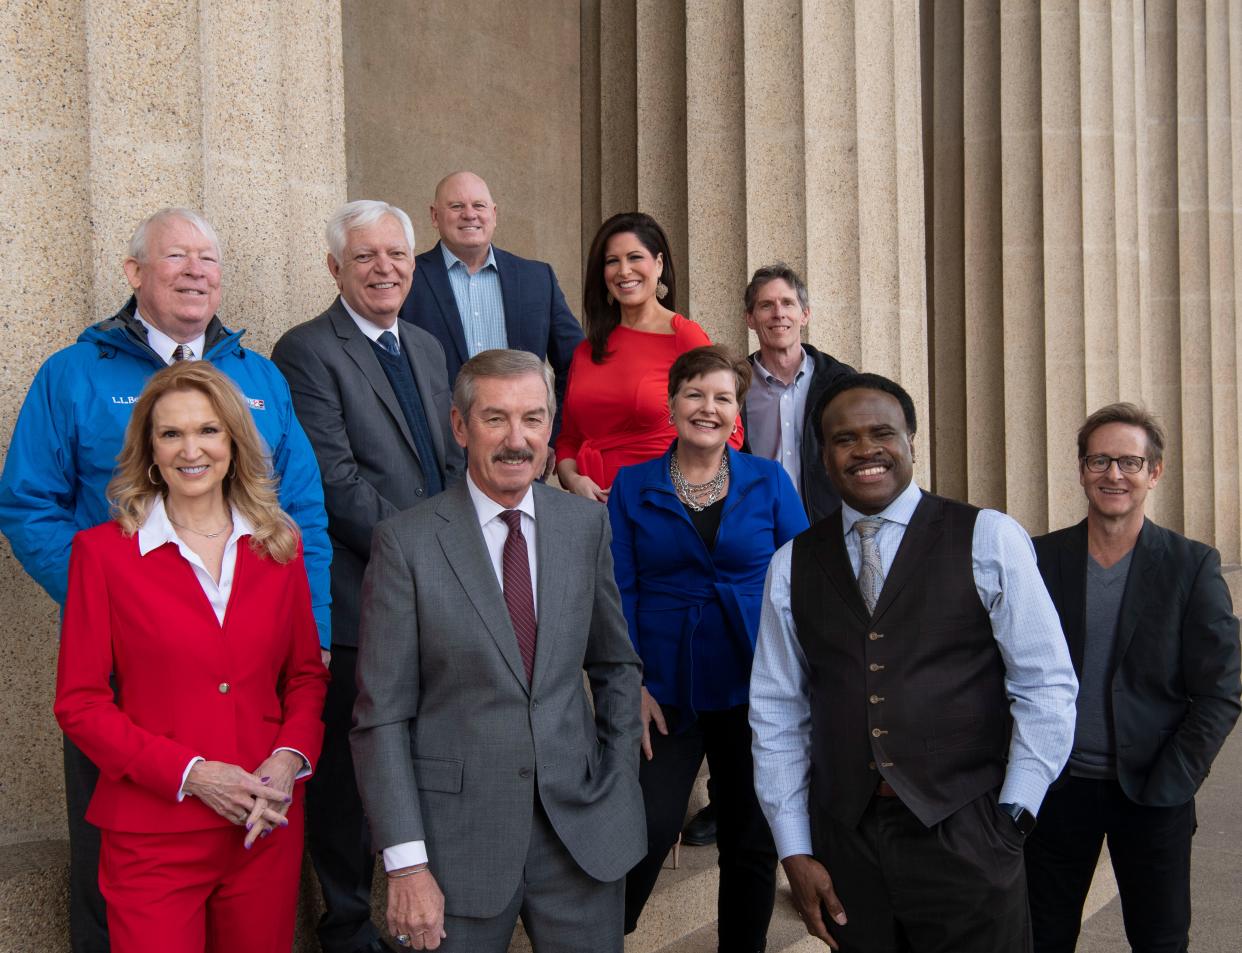 From left front, Channel 4's Lisa Spencer, Channel 2's Davis Nolan, Channel 5's Lelan Statom, back Channel 2's Davis Nolan, Channel 5's Phil Williams, The Tennessean's Mike Organ, Channel 4's Holly Thompson, Channel 5's Jennifer Kraus, The Tennessean's Andy Humbles and Channel 5's Nick Beres at Centennial Park in Nashville, Tenn., Thursday, Feb. 8, 2024.